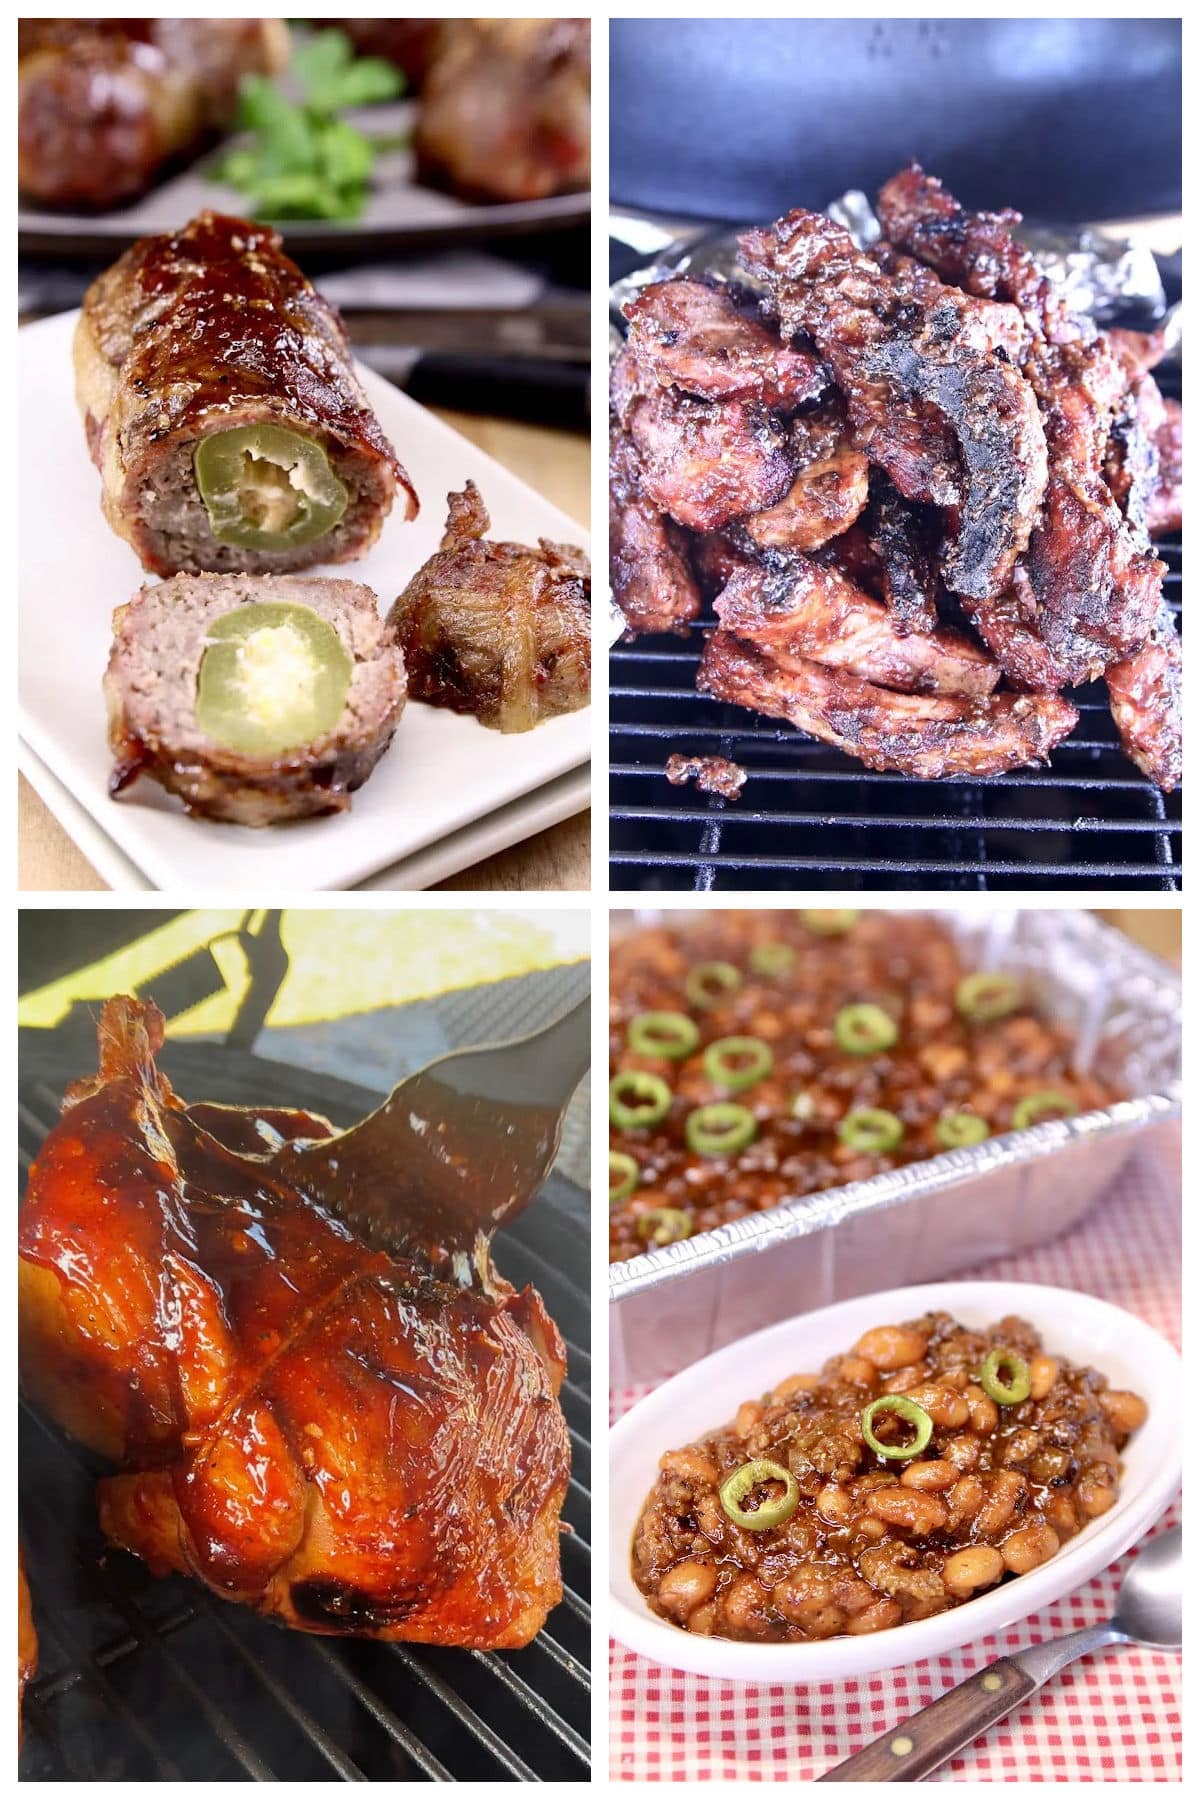 Collage of bbq dishes for Labor day cookout.